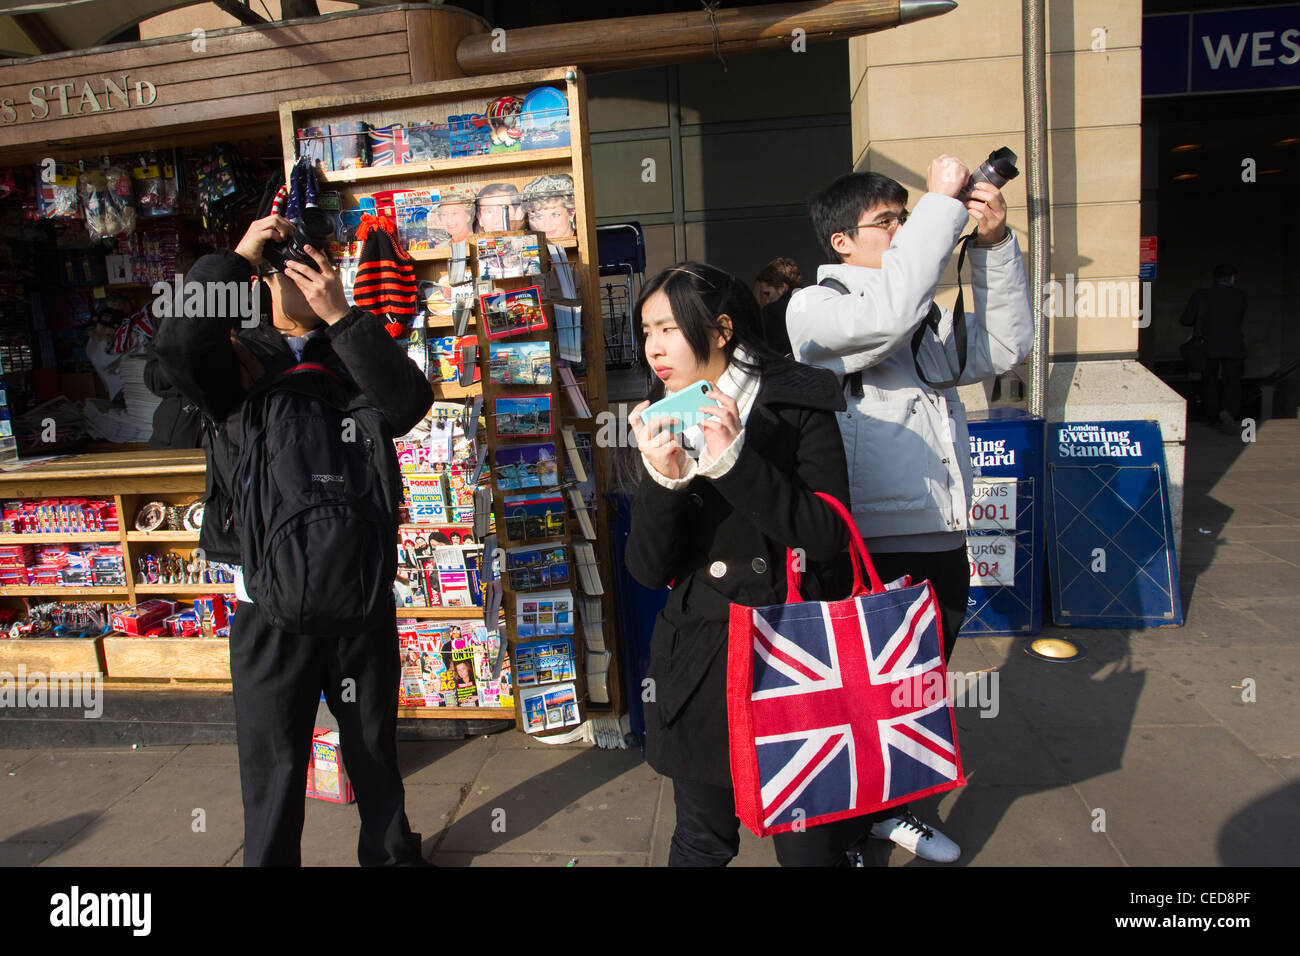 Tourists taking photos in Westminster, London, UK Stock Photo